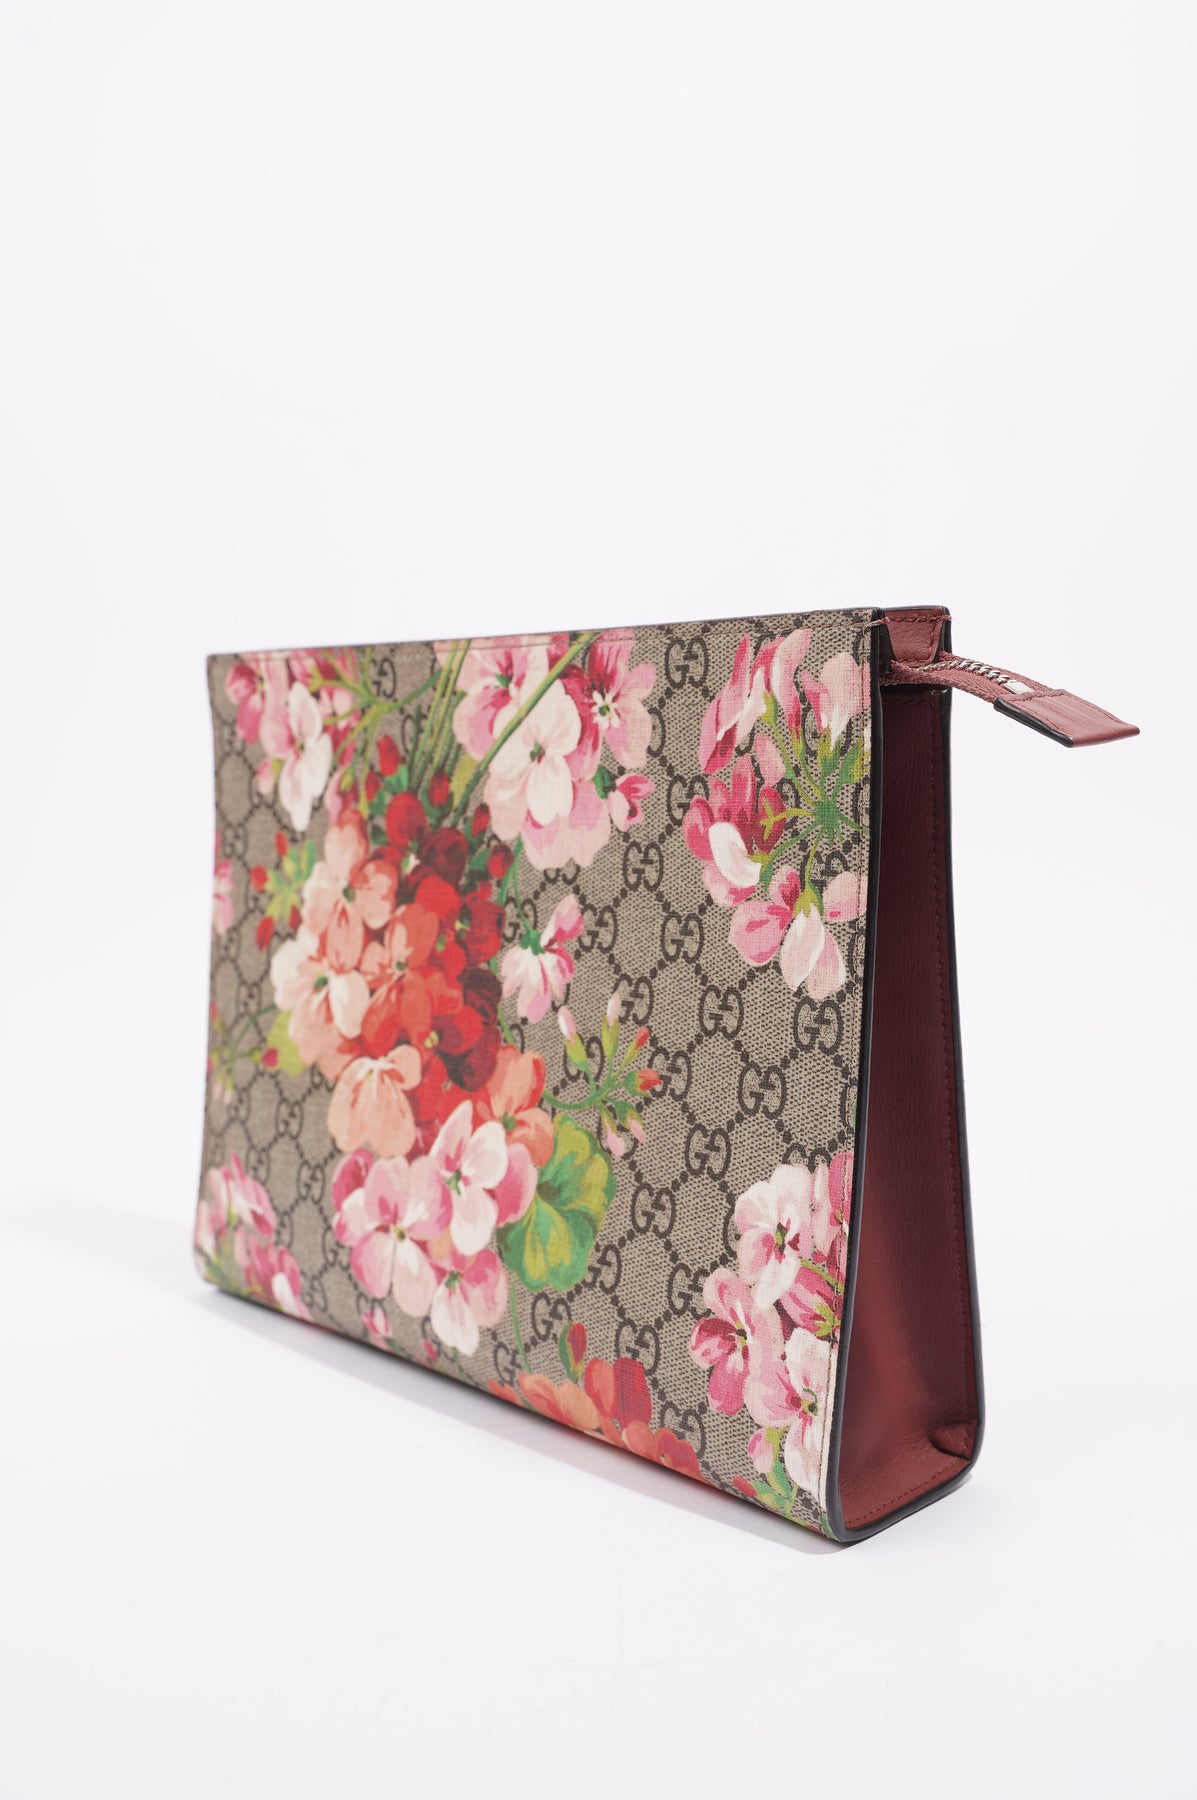 NEW Gucci Bloom Pouch